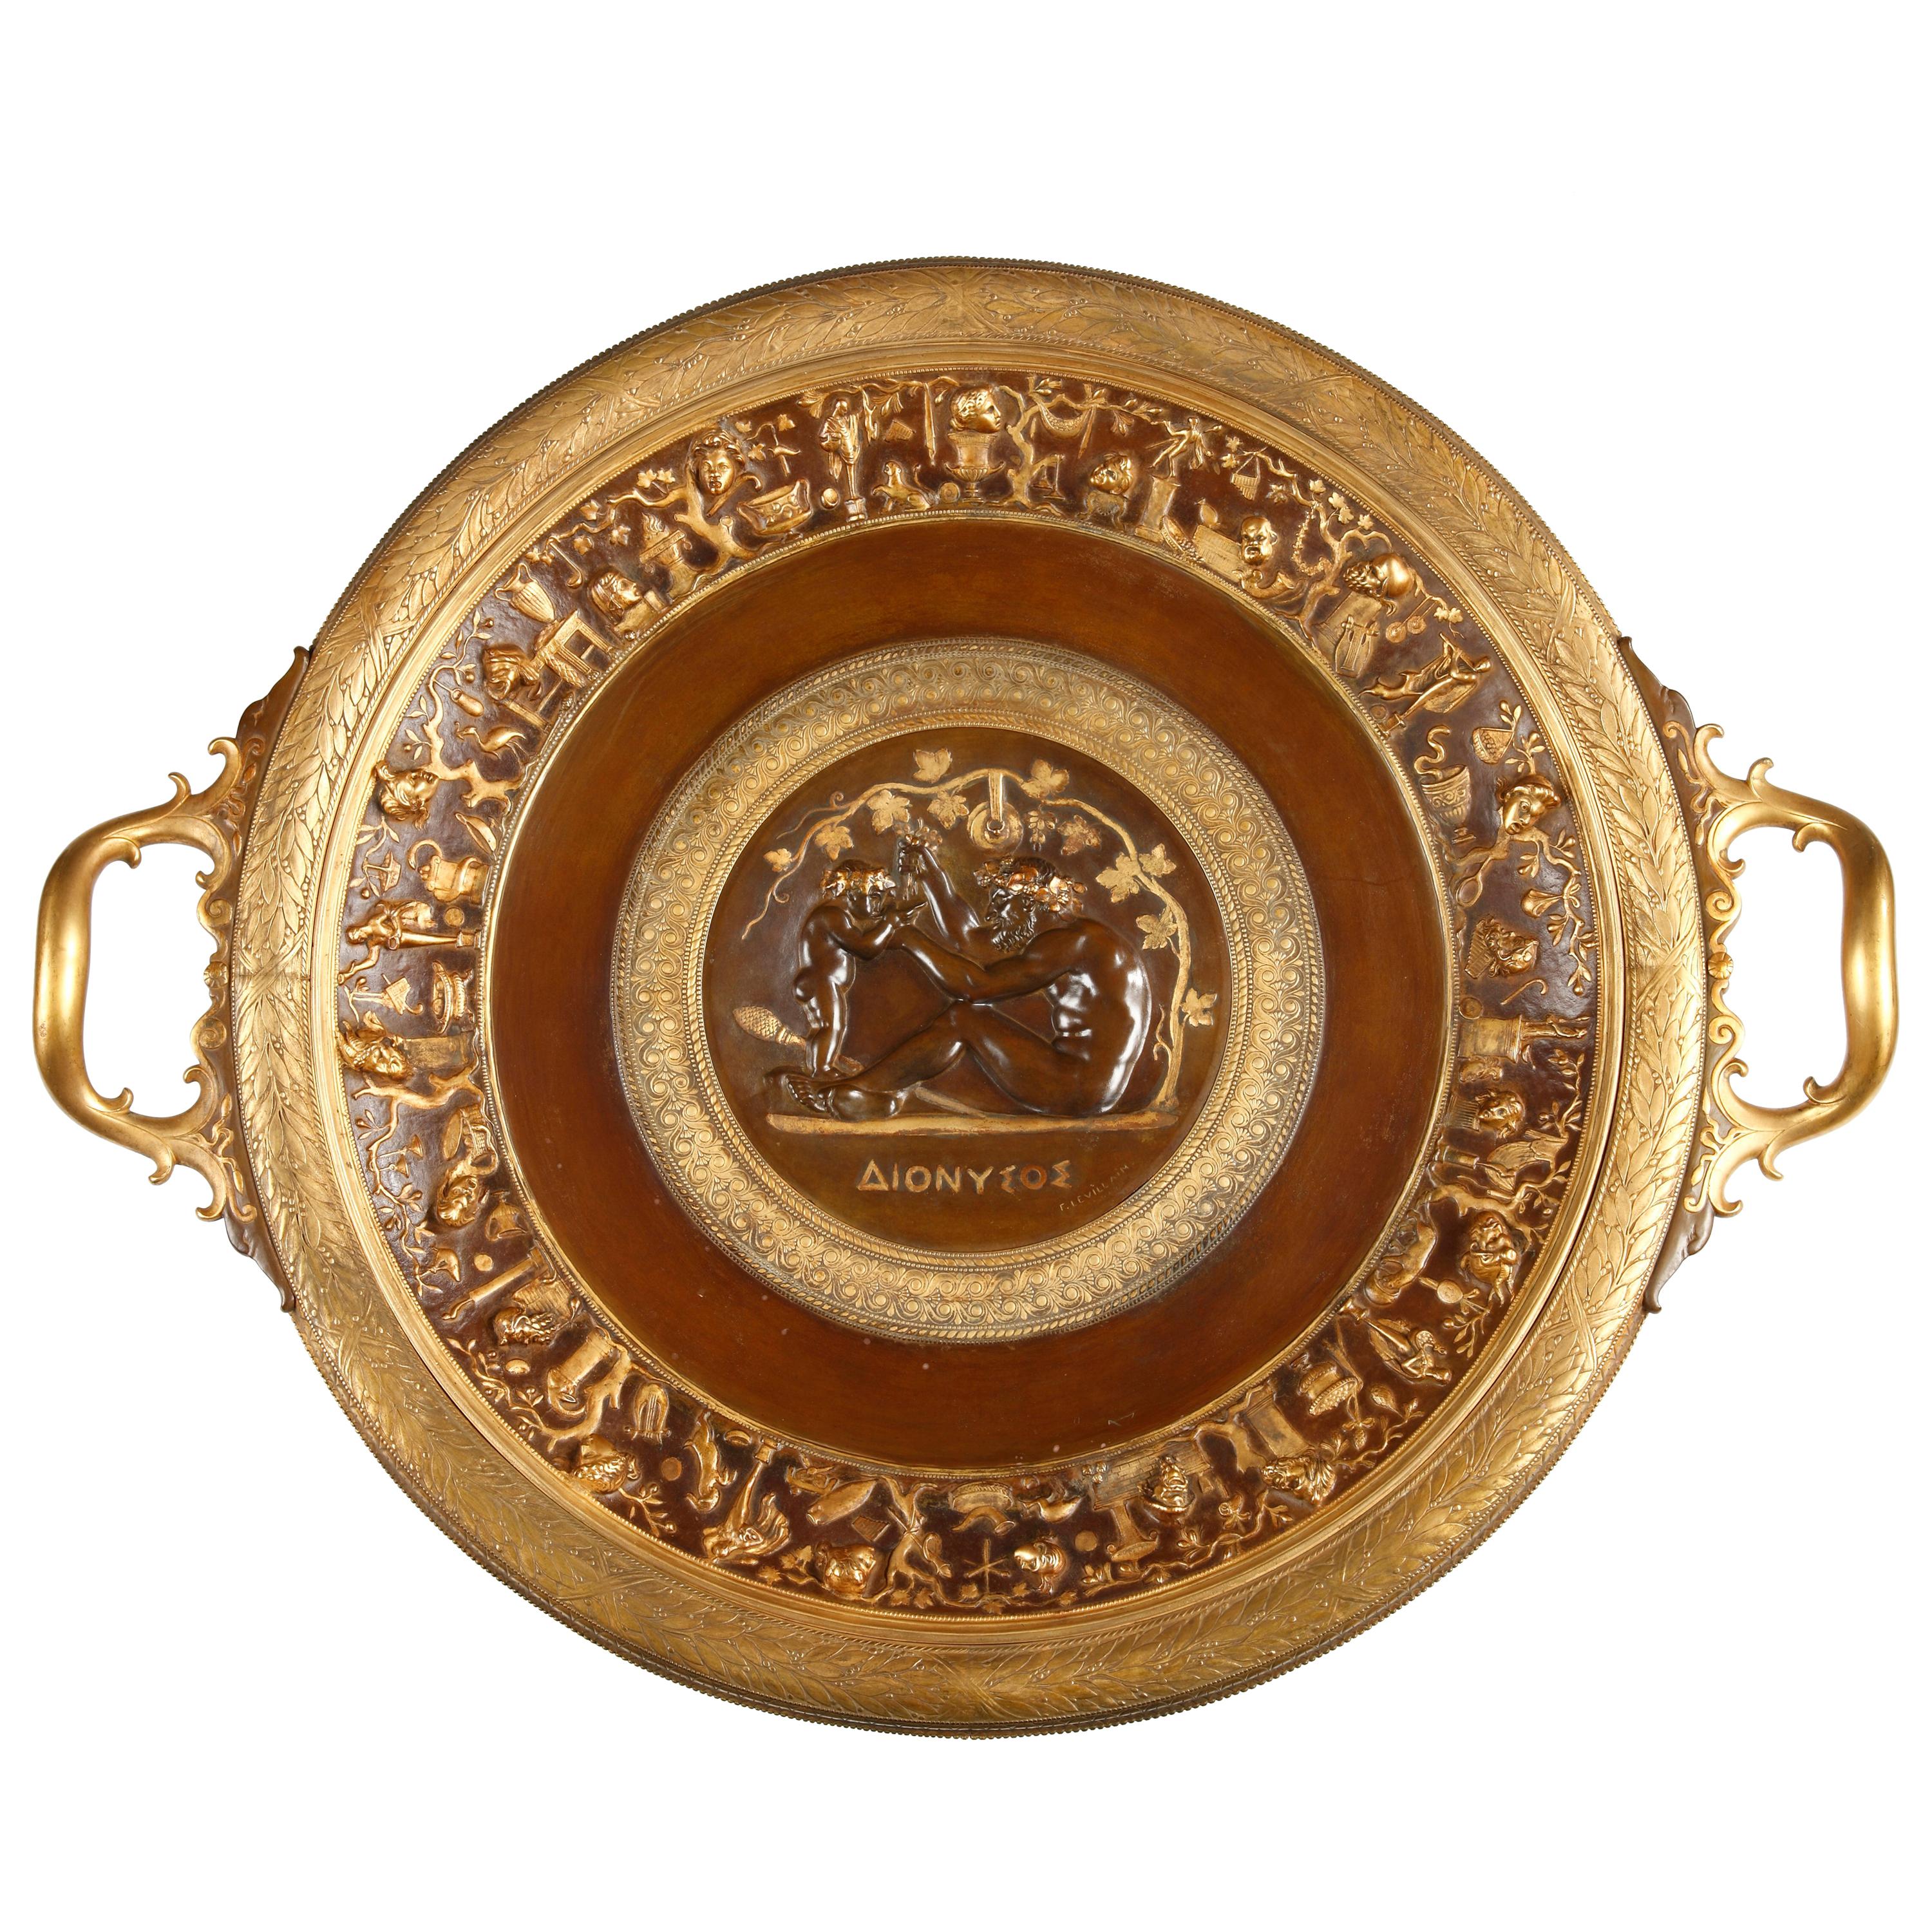 Large “Dionysos” Display Dish by F. Levillain and F. Barbedienne